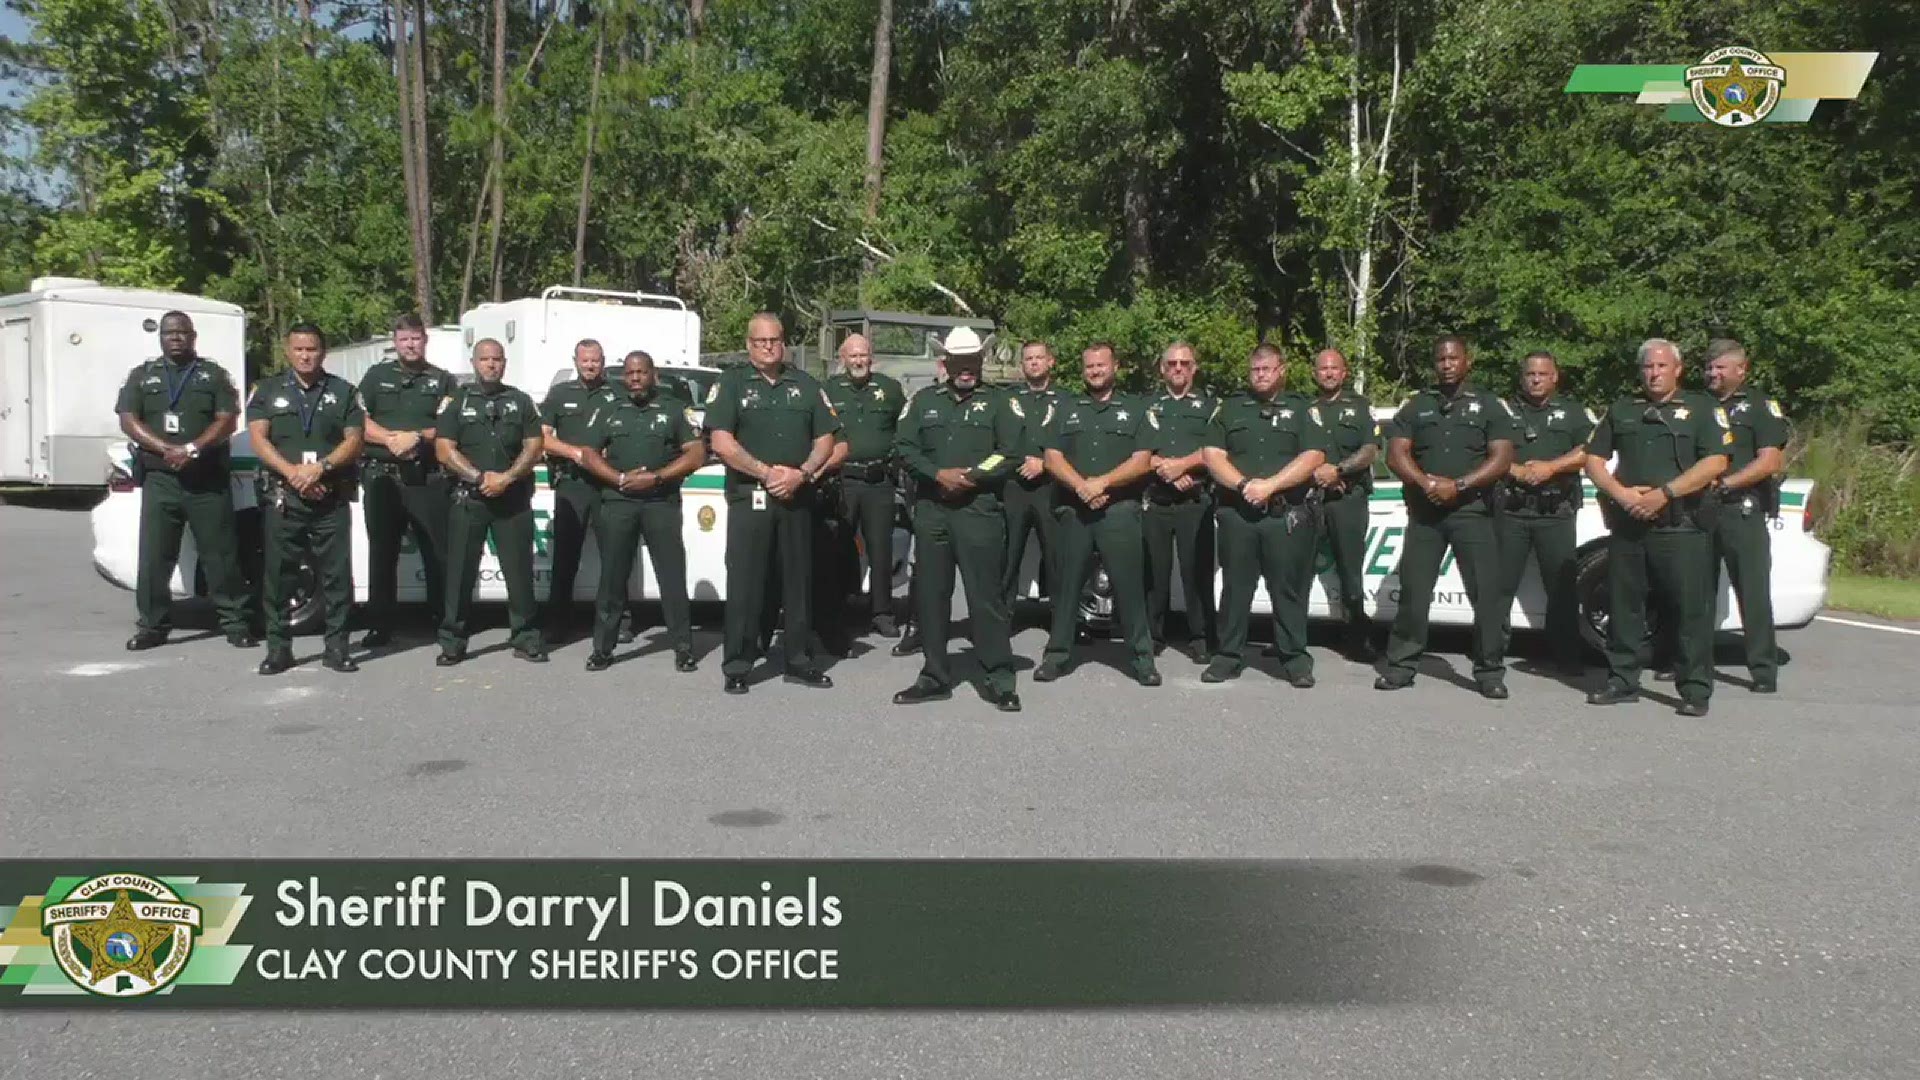 Clay County Sheriff Darryl Daniels says "lawlessness" is unacceptable. (Video: Clay County Sheriff's Office)